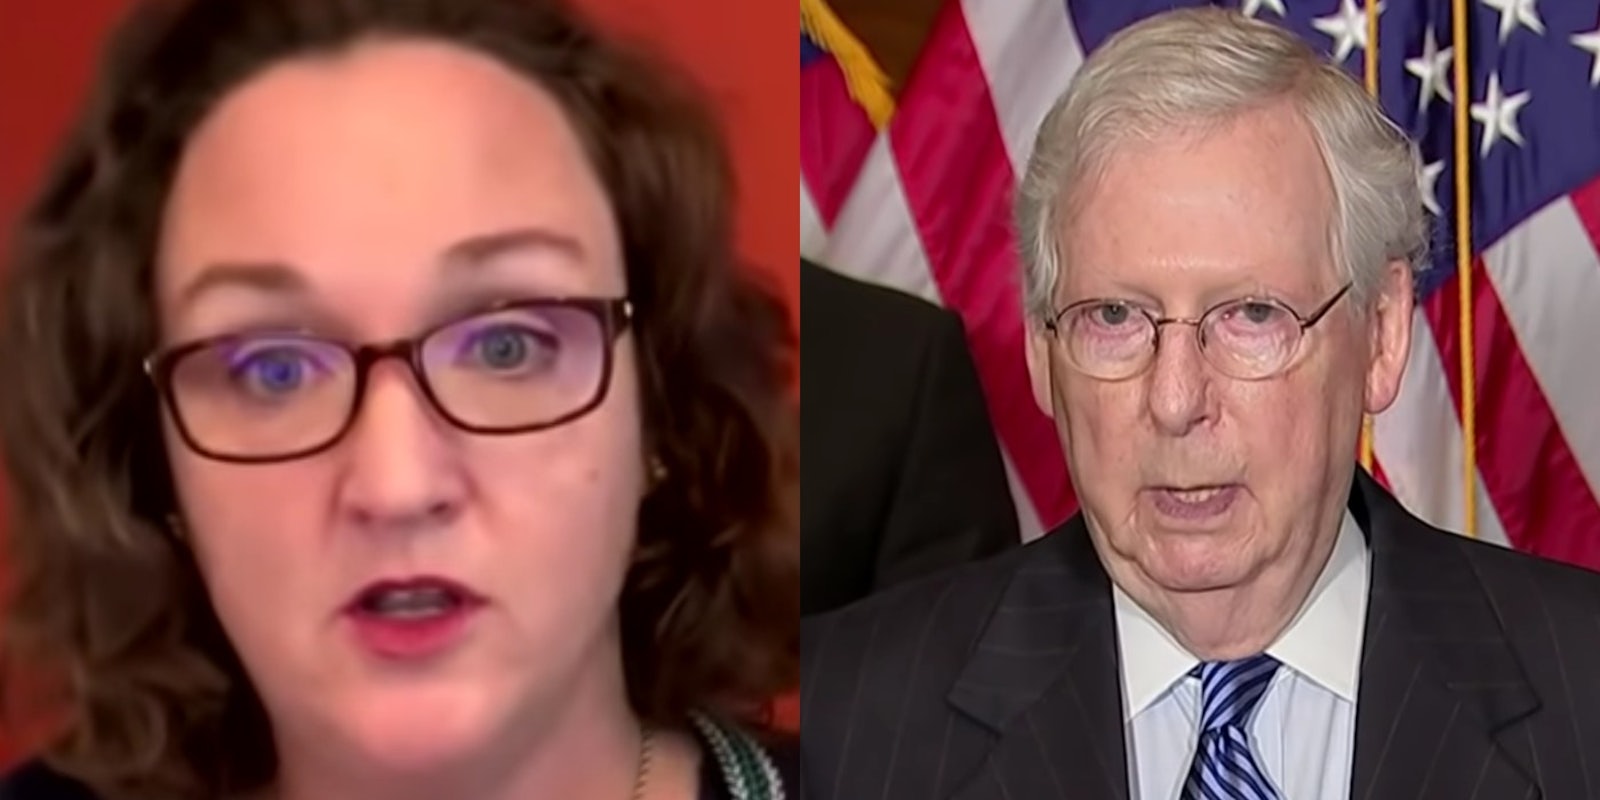 congresswoman-porter-rips-mitch-mcconnell-covid-relief-bill-twitter